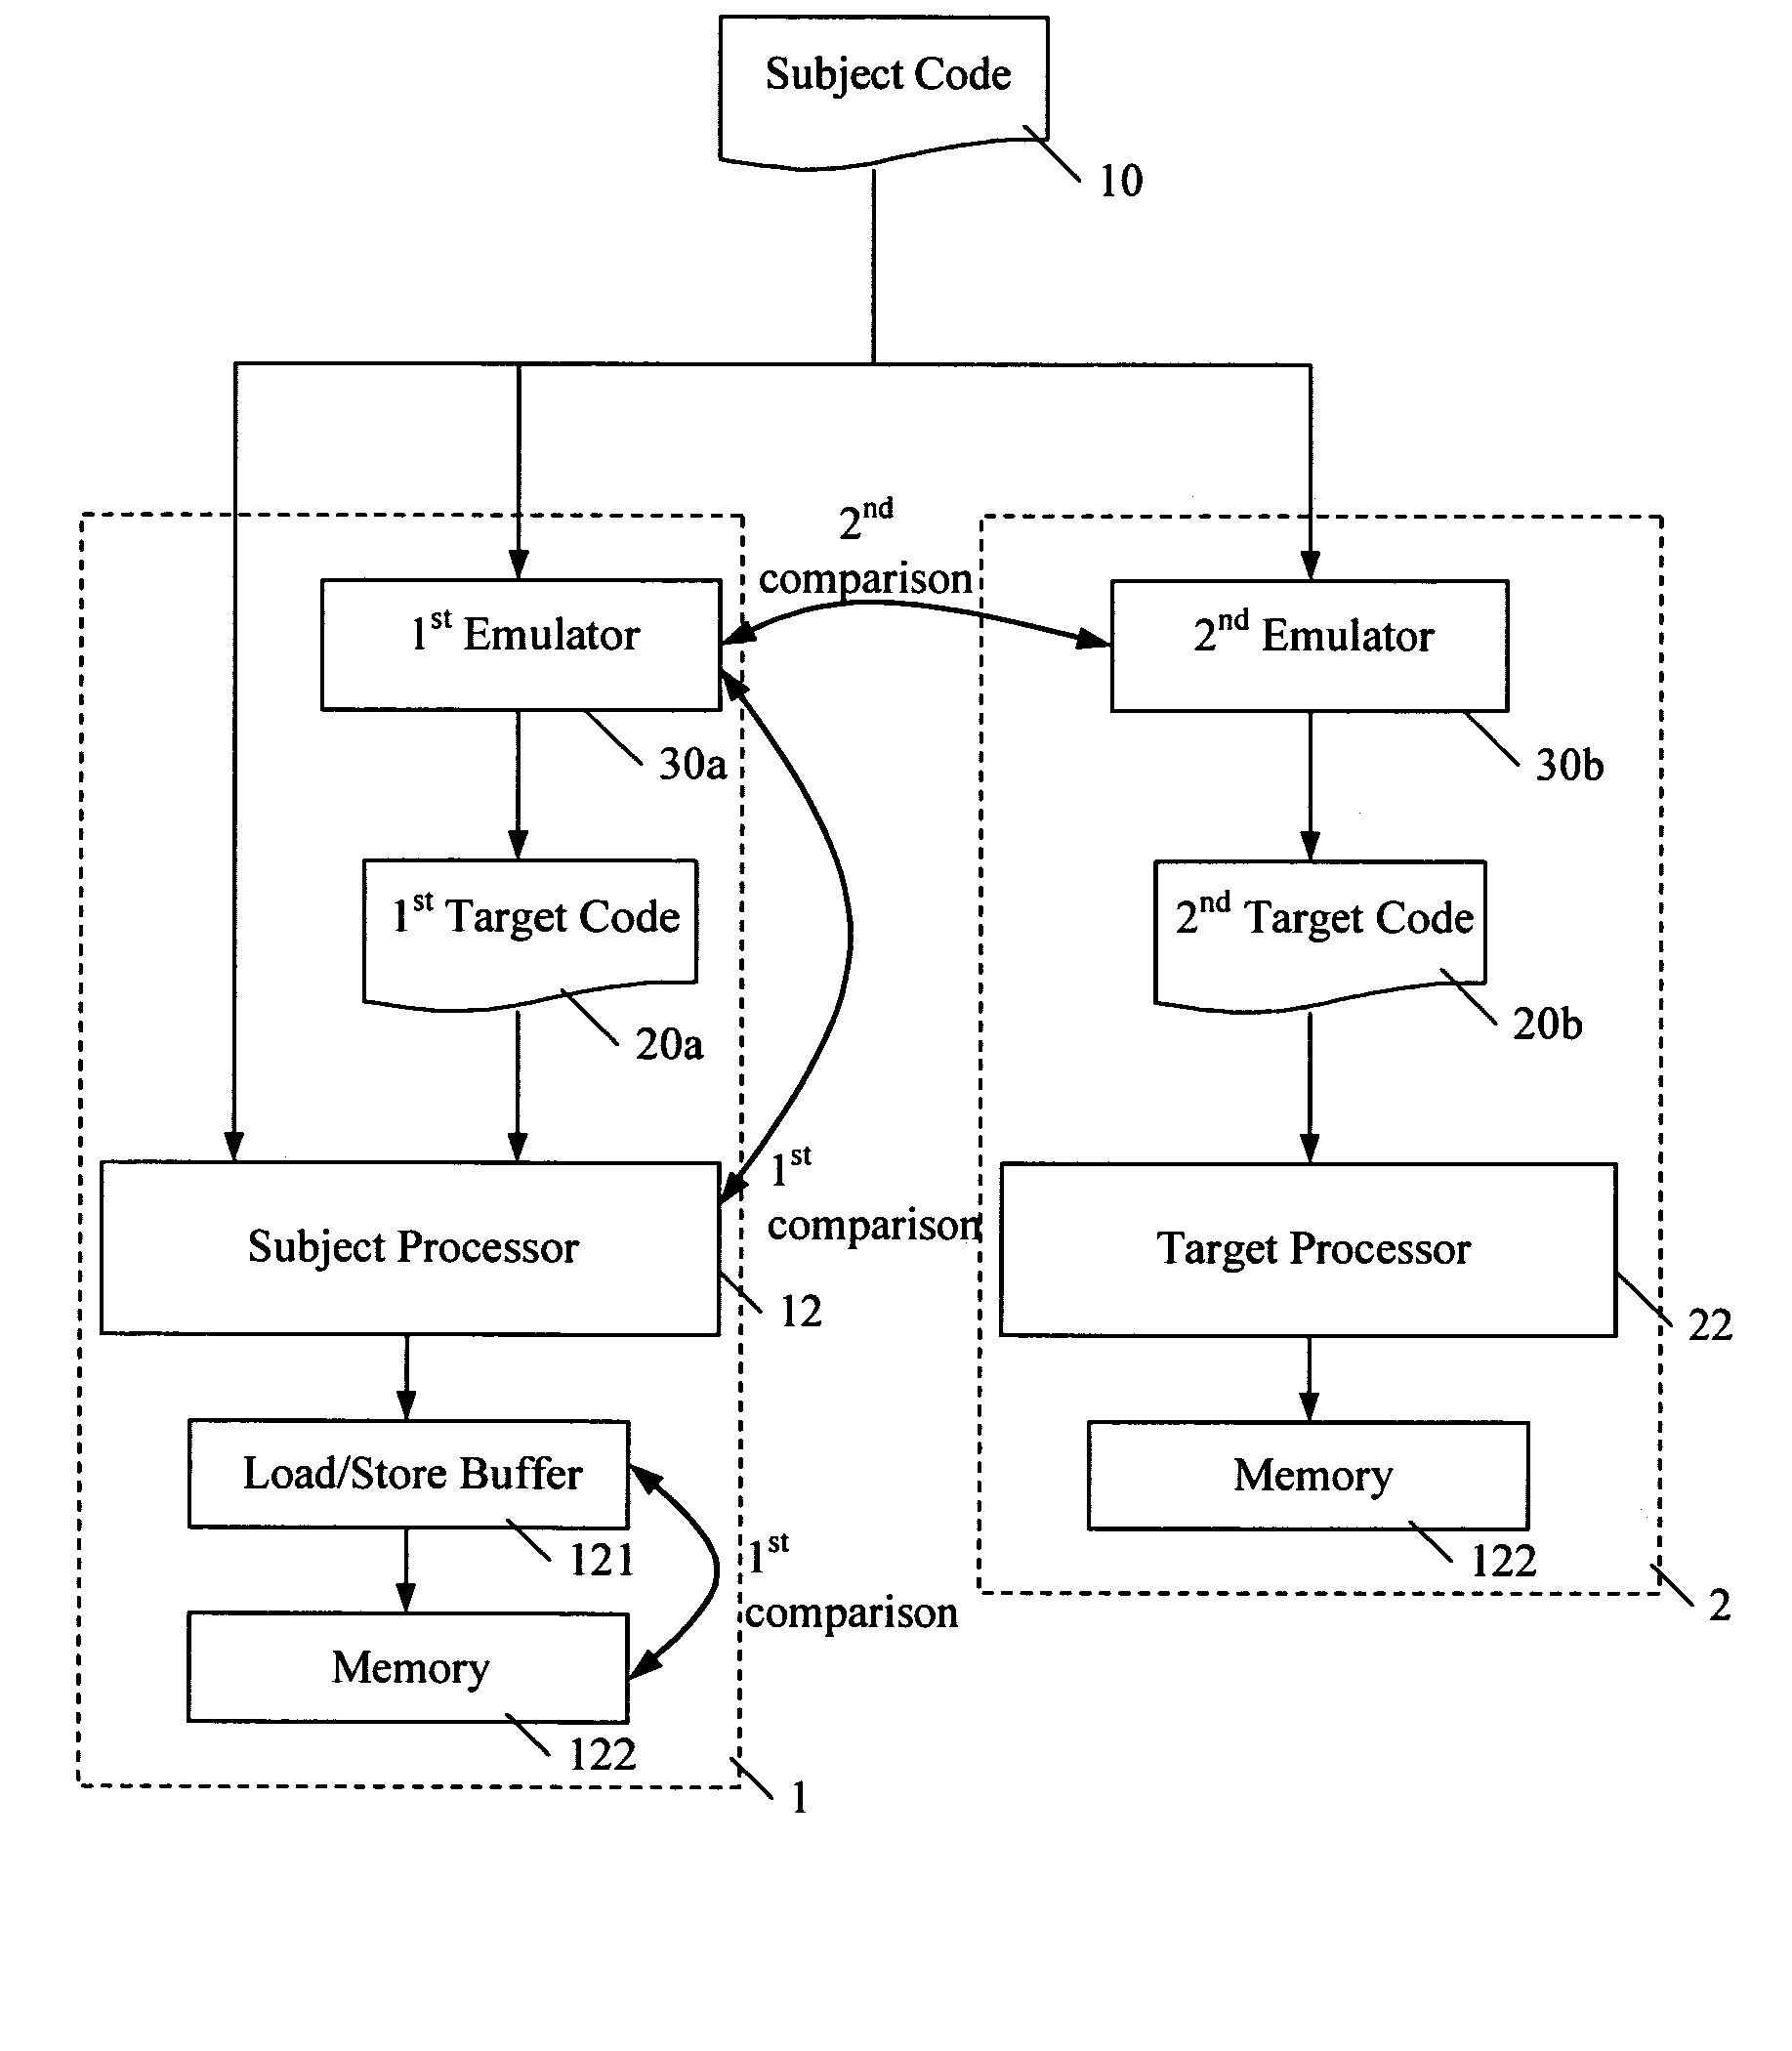 Method and apparatus for performing incremental validation of program code conversion